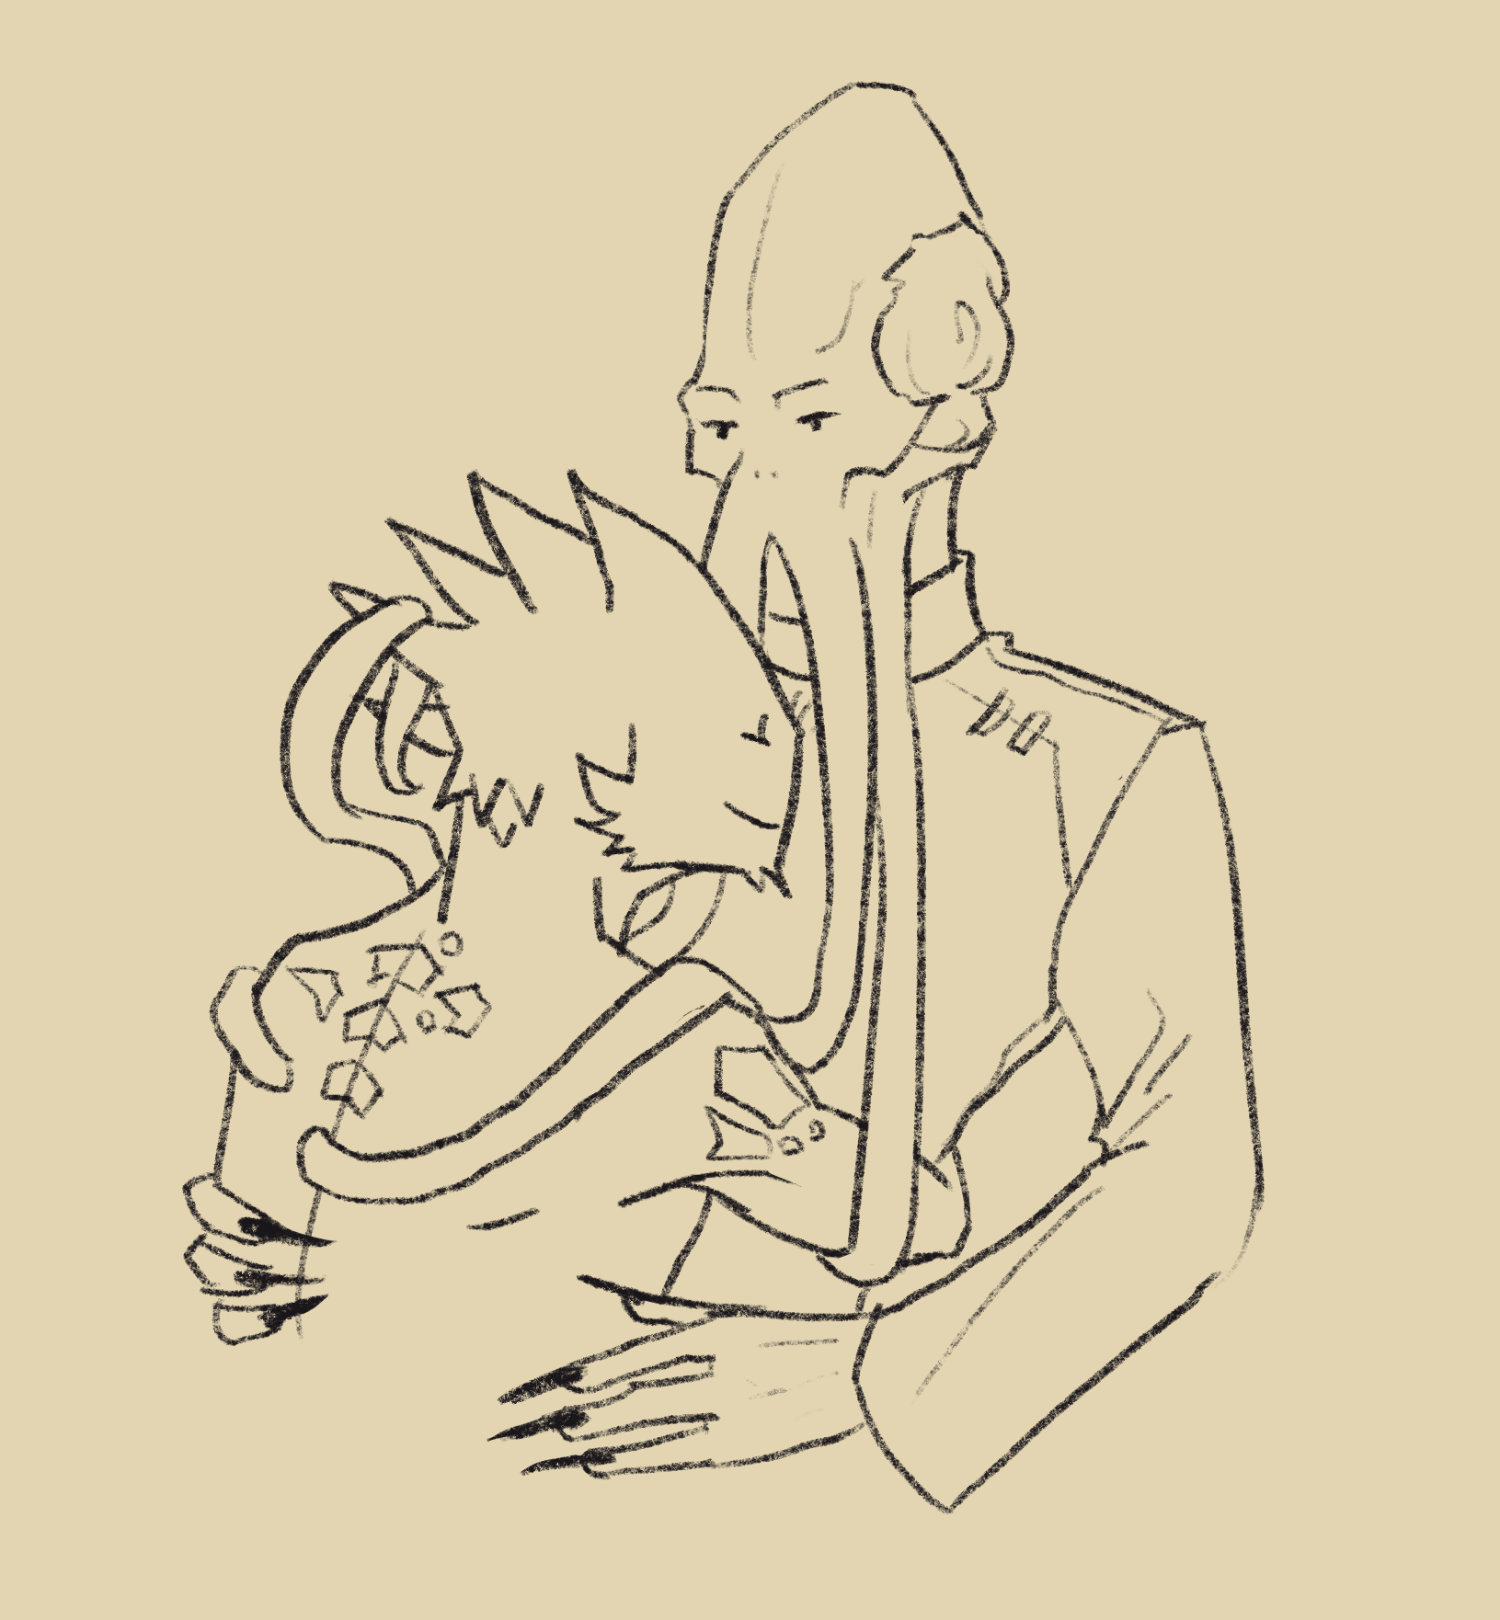 A dragonborn hugging an illithid. They look content.